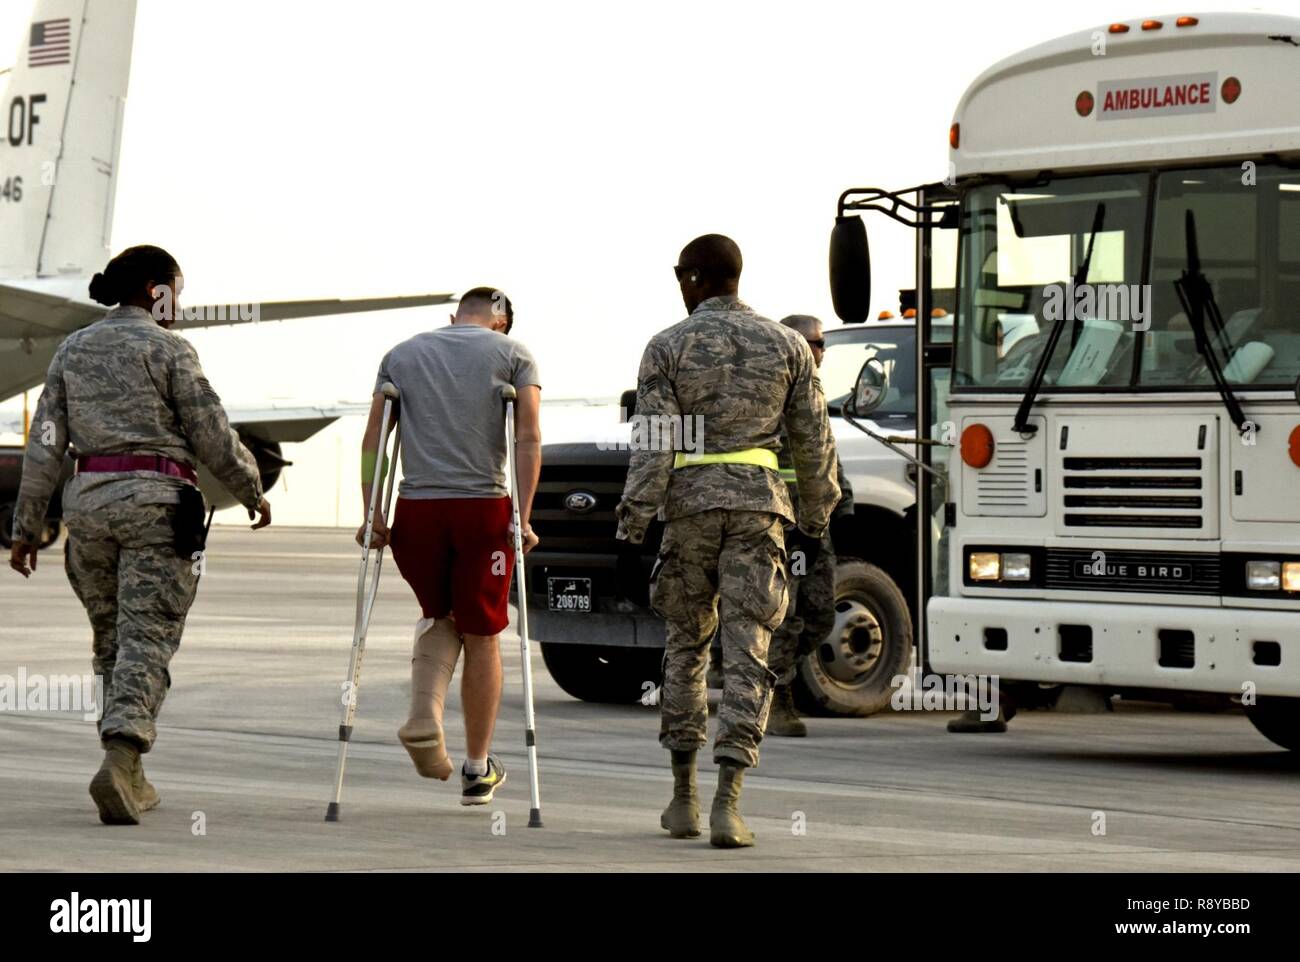 Aerospace medical technicians with the 379th Expeditionary Medical Group escort a patient from an aircraft at Al Udeid Air Base, Qatar, March 8, 2017. These technicians are a key component of transportation and support services between arrival and departure of patients from around the U.S. Central Command area of responsibility. Stock Photo